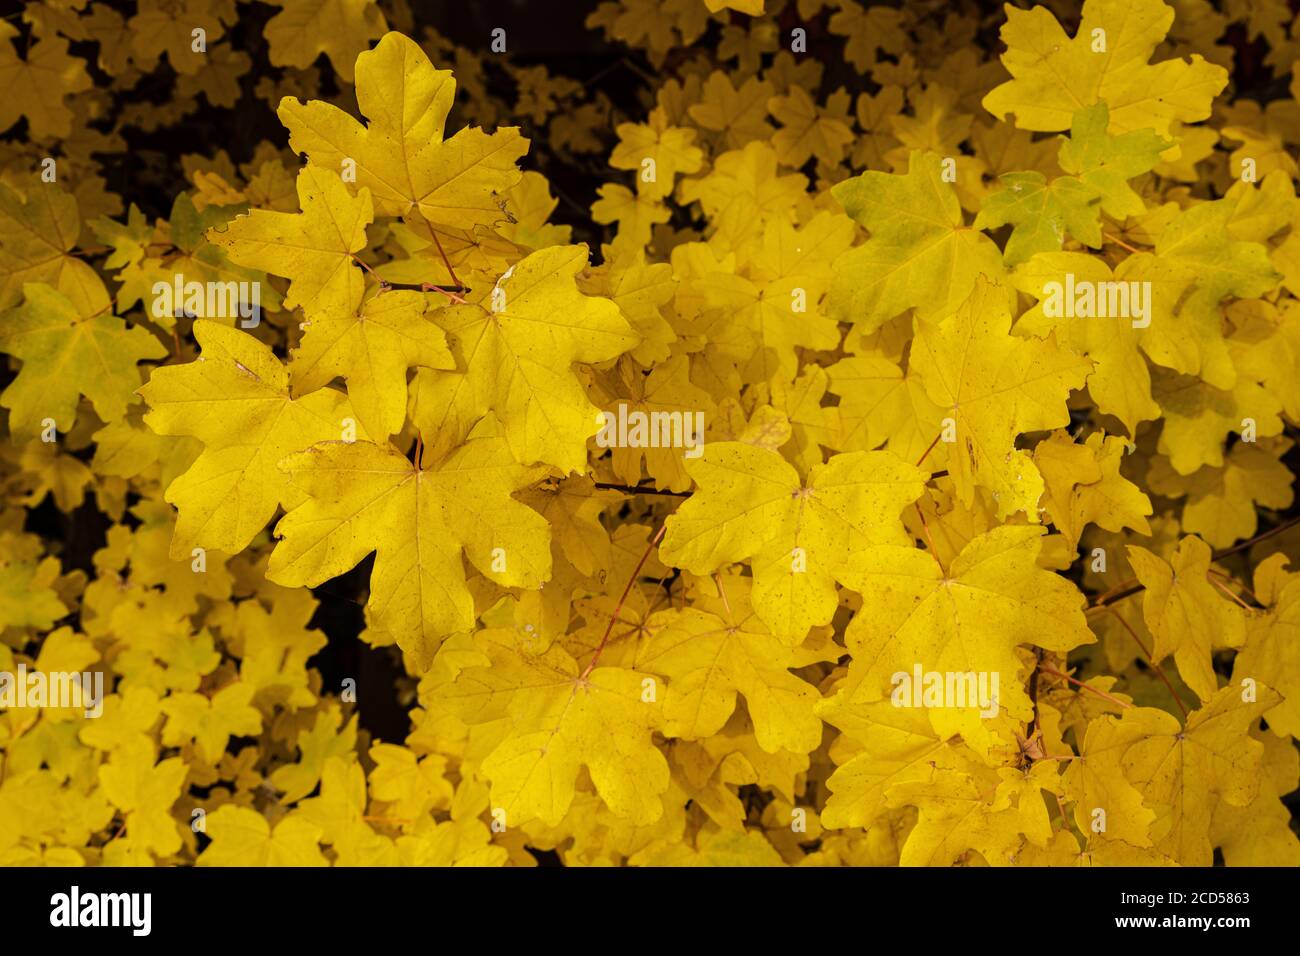 Yellow Maple Leaves in Autumn Stock Photo